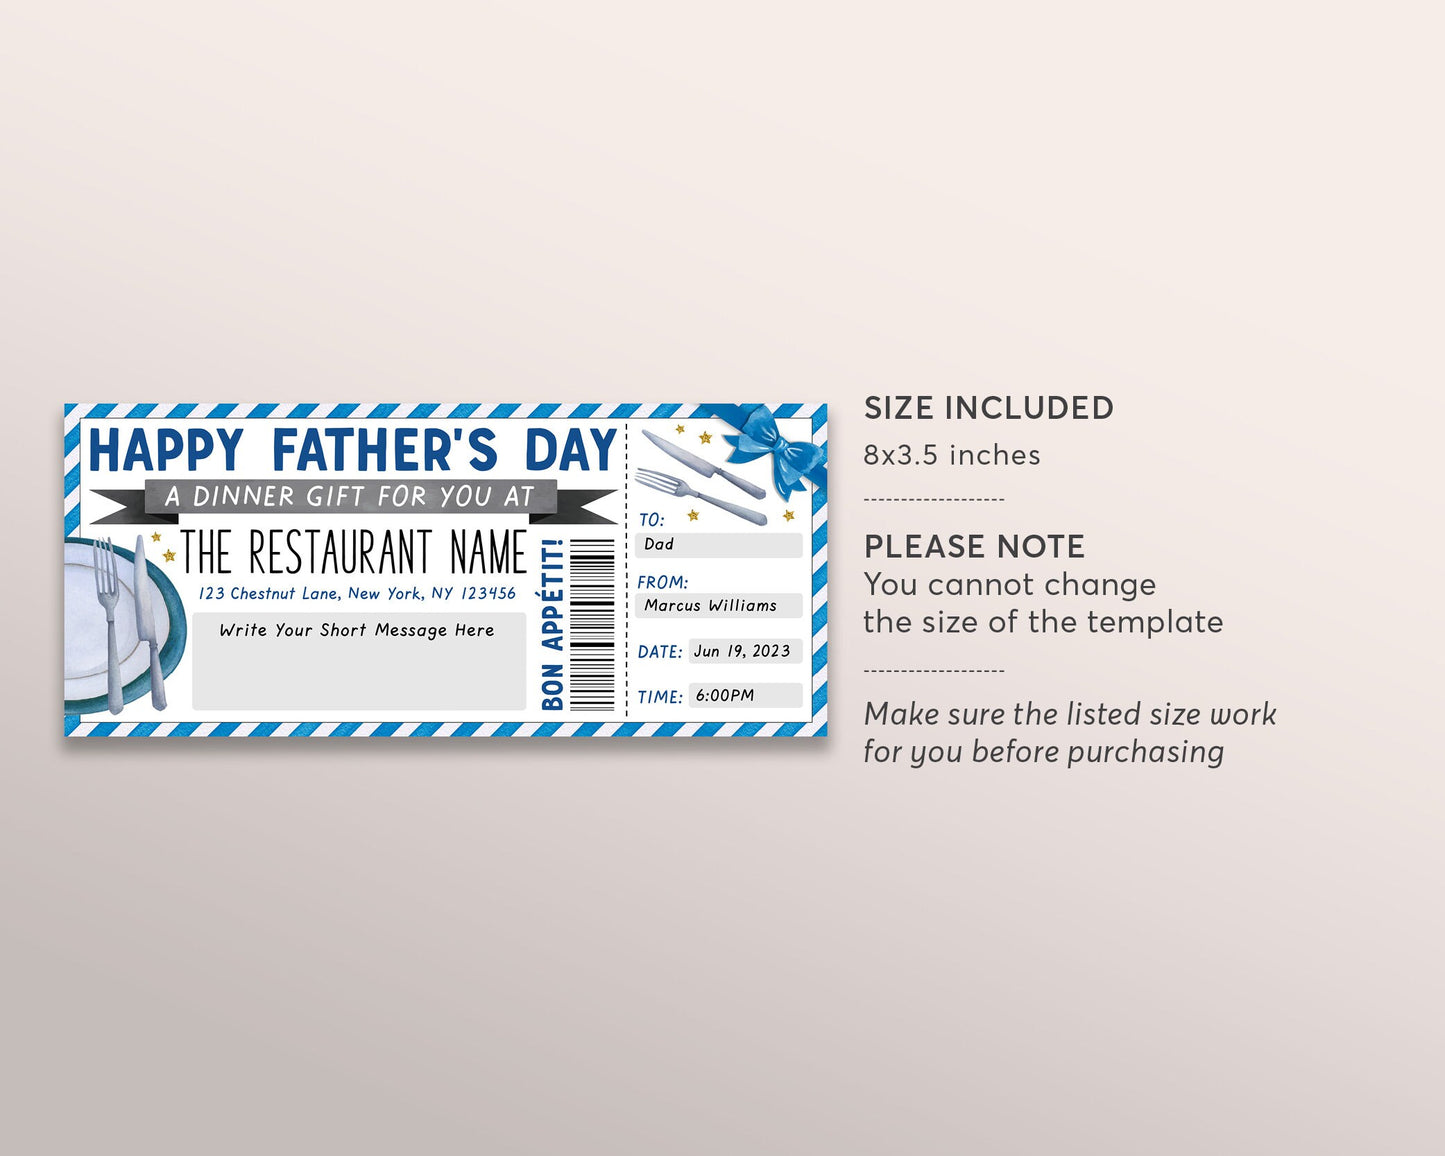 Fathers Day Restaurant Gift Voucher Editable Template, Surprise Dinner Gift Certificate Invite For Dad, Dining Night Out Coupon Reveal